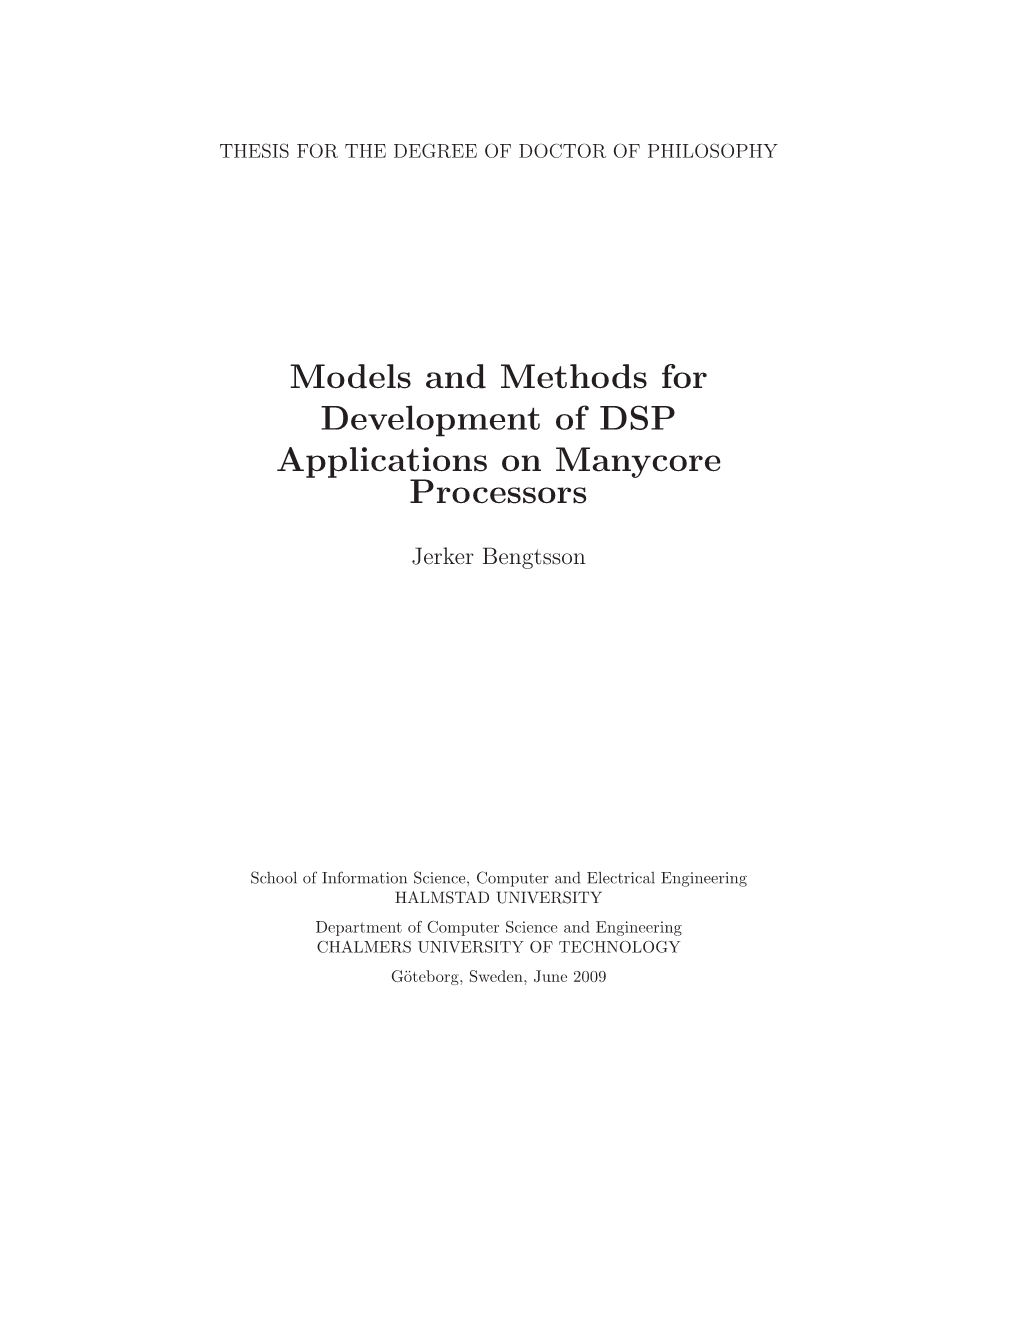 Models and Methods for Development of DSP Applications on Manycore Processors